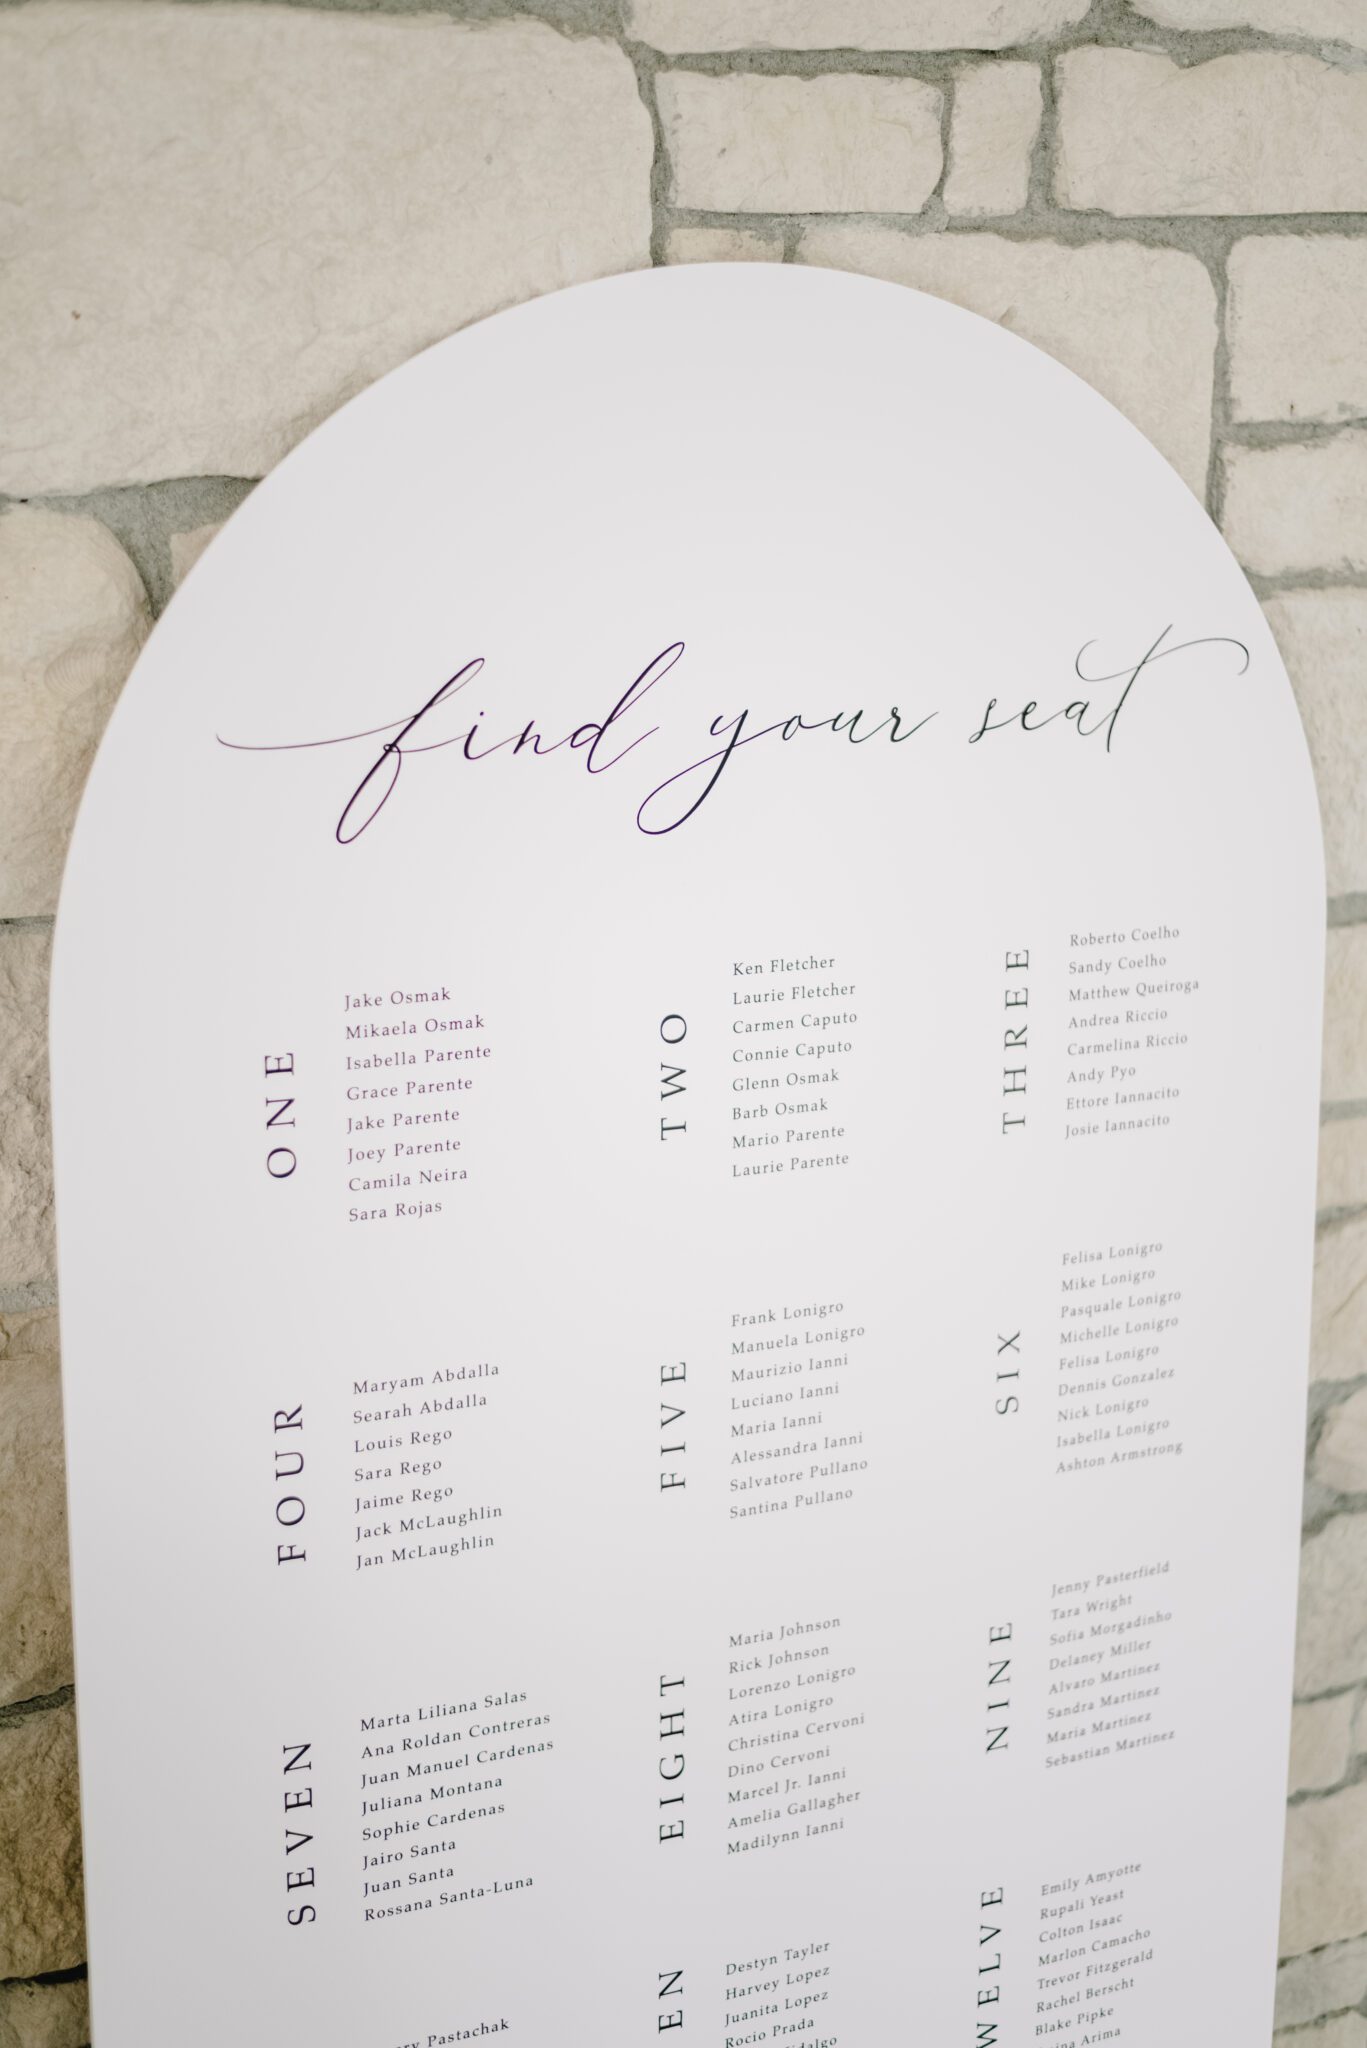 White and black wedding reception seating chart. Elegant summer wedding reception at Sparrow Lane Events in Alberta. Summer wedding features white roses, greenery blush decor accents and warm wood tones.